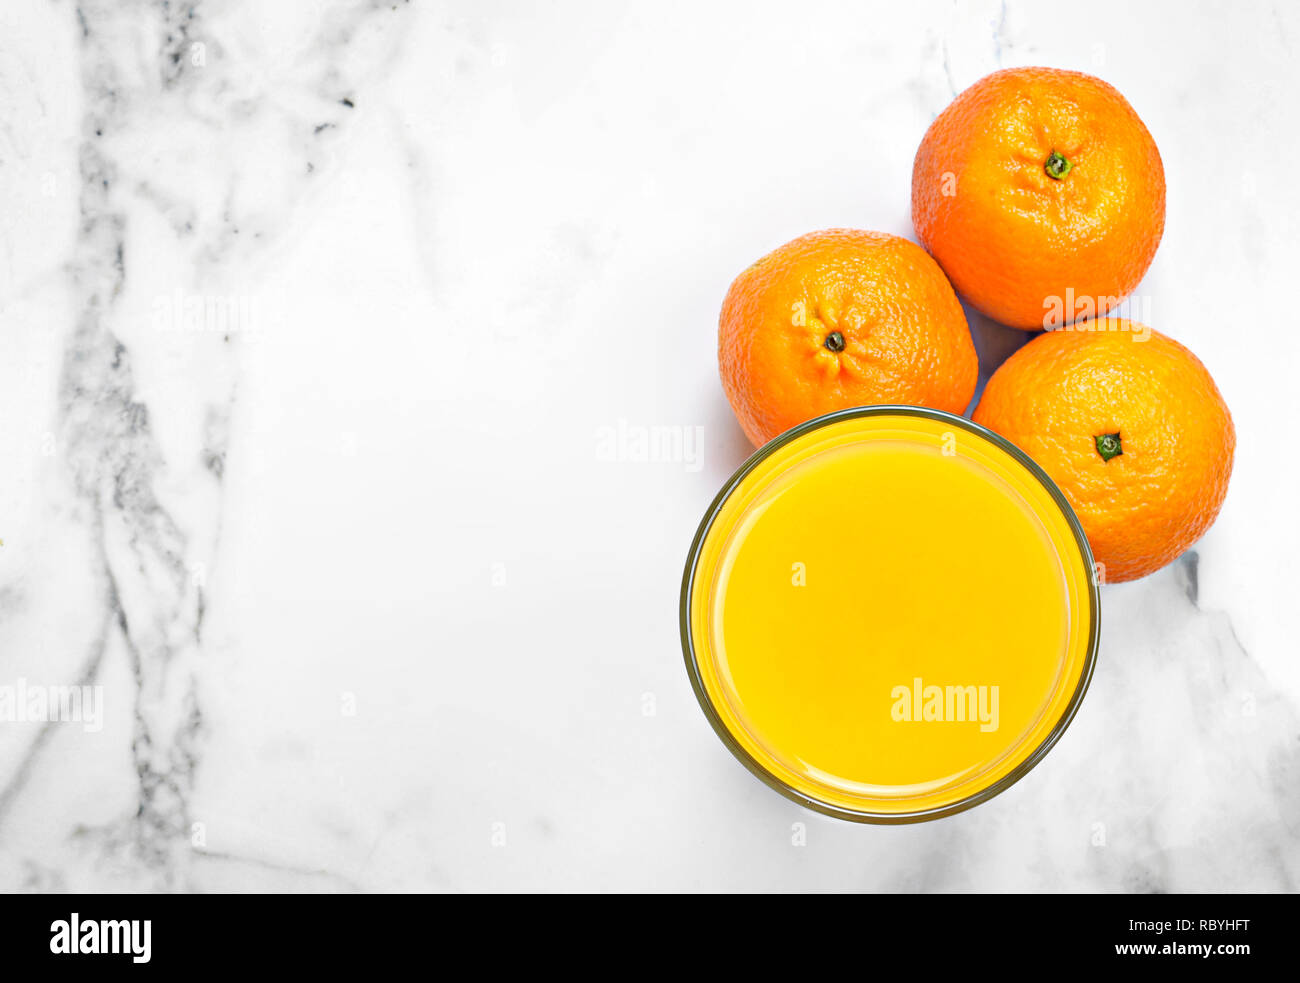 Fresh orange juice in a glass, top view. Healthy fruit juice on white marble or stone background. Stock Photo